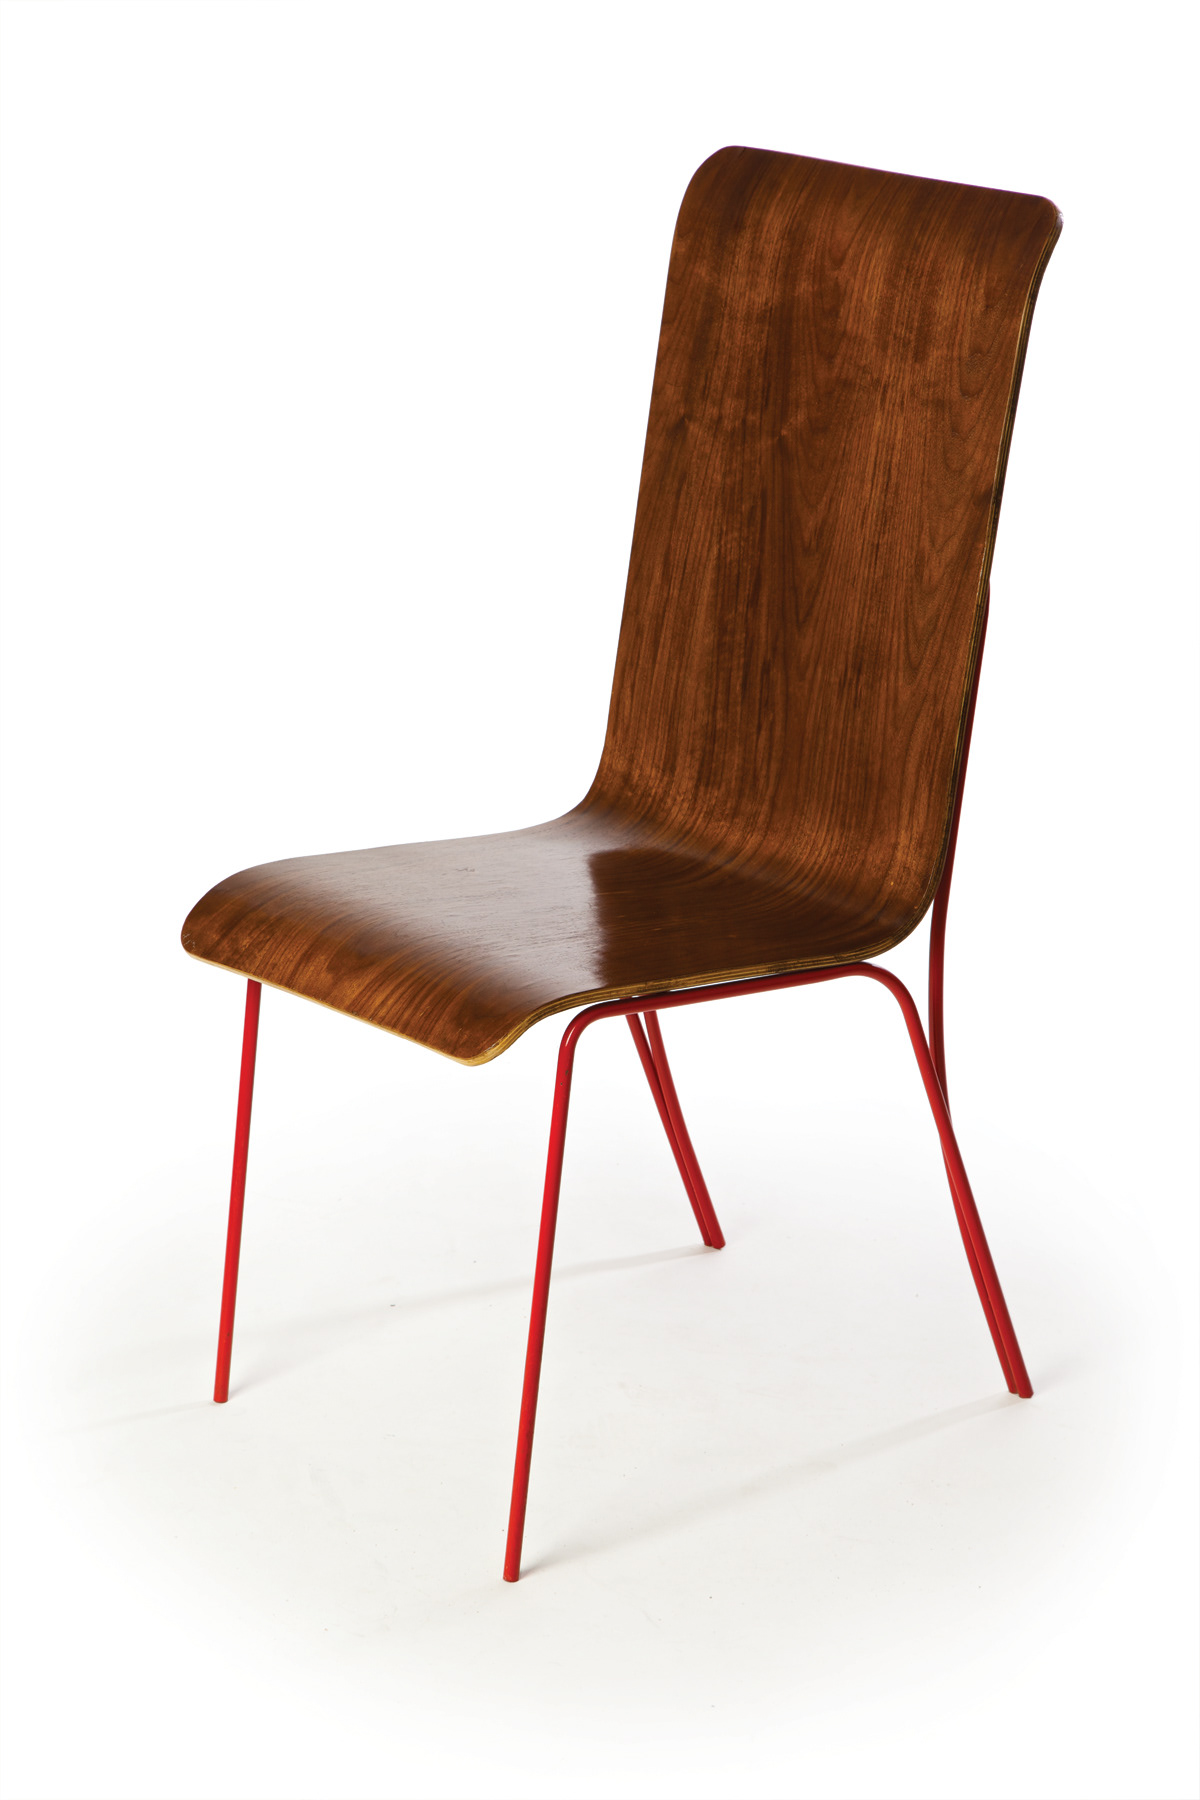 steel plywood dining chair chair dining